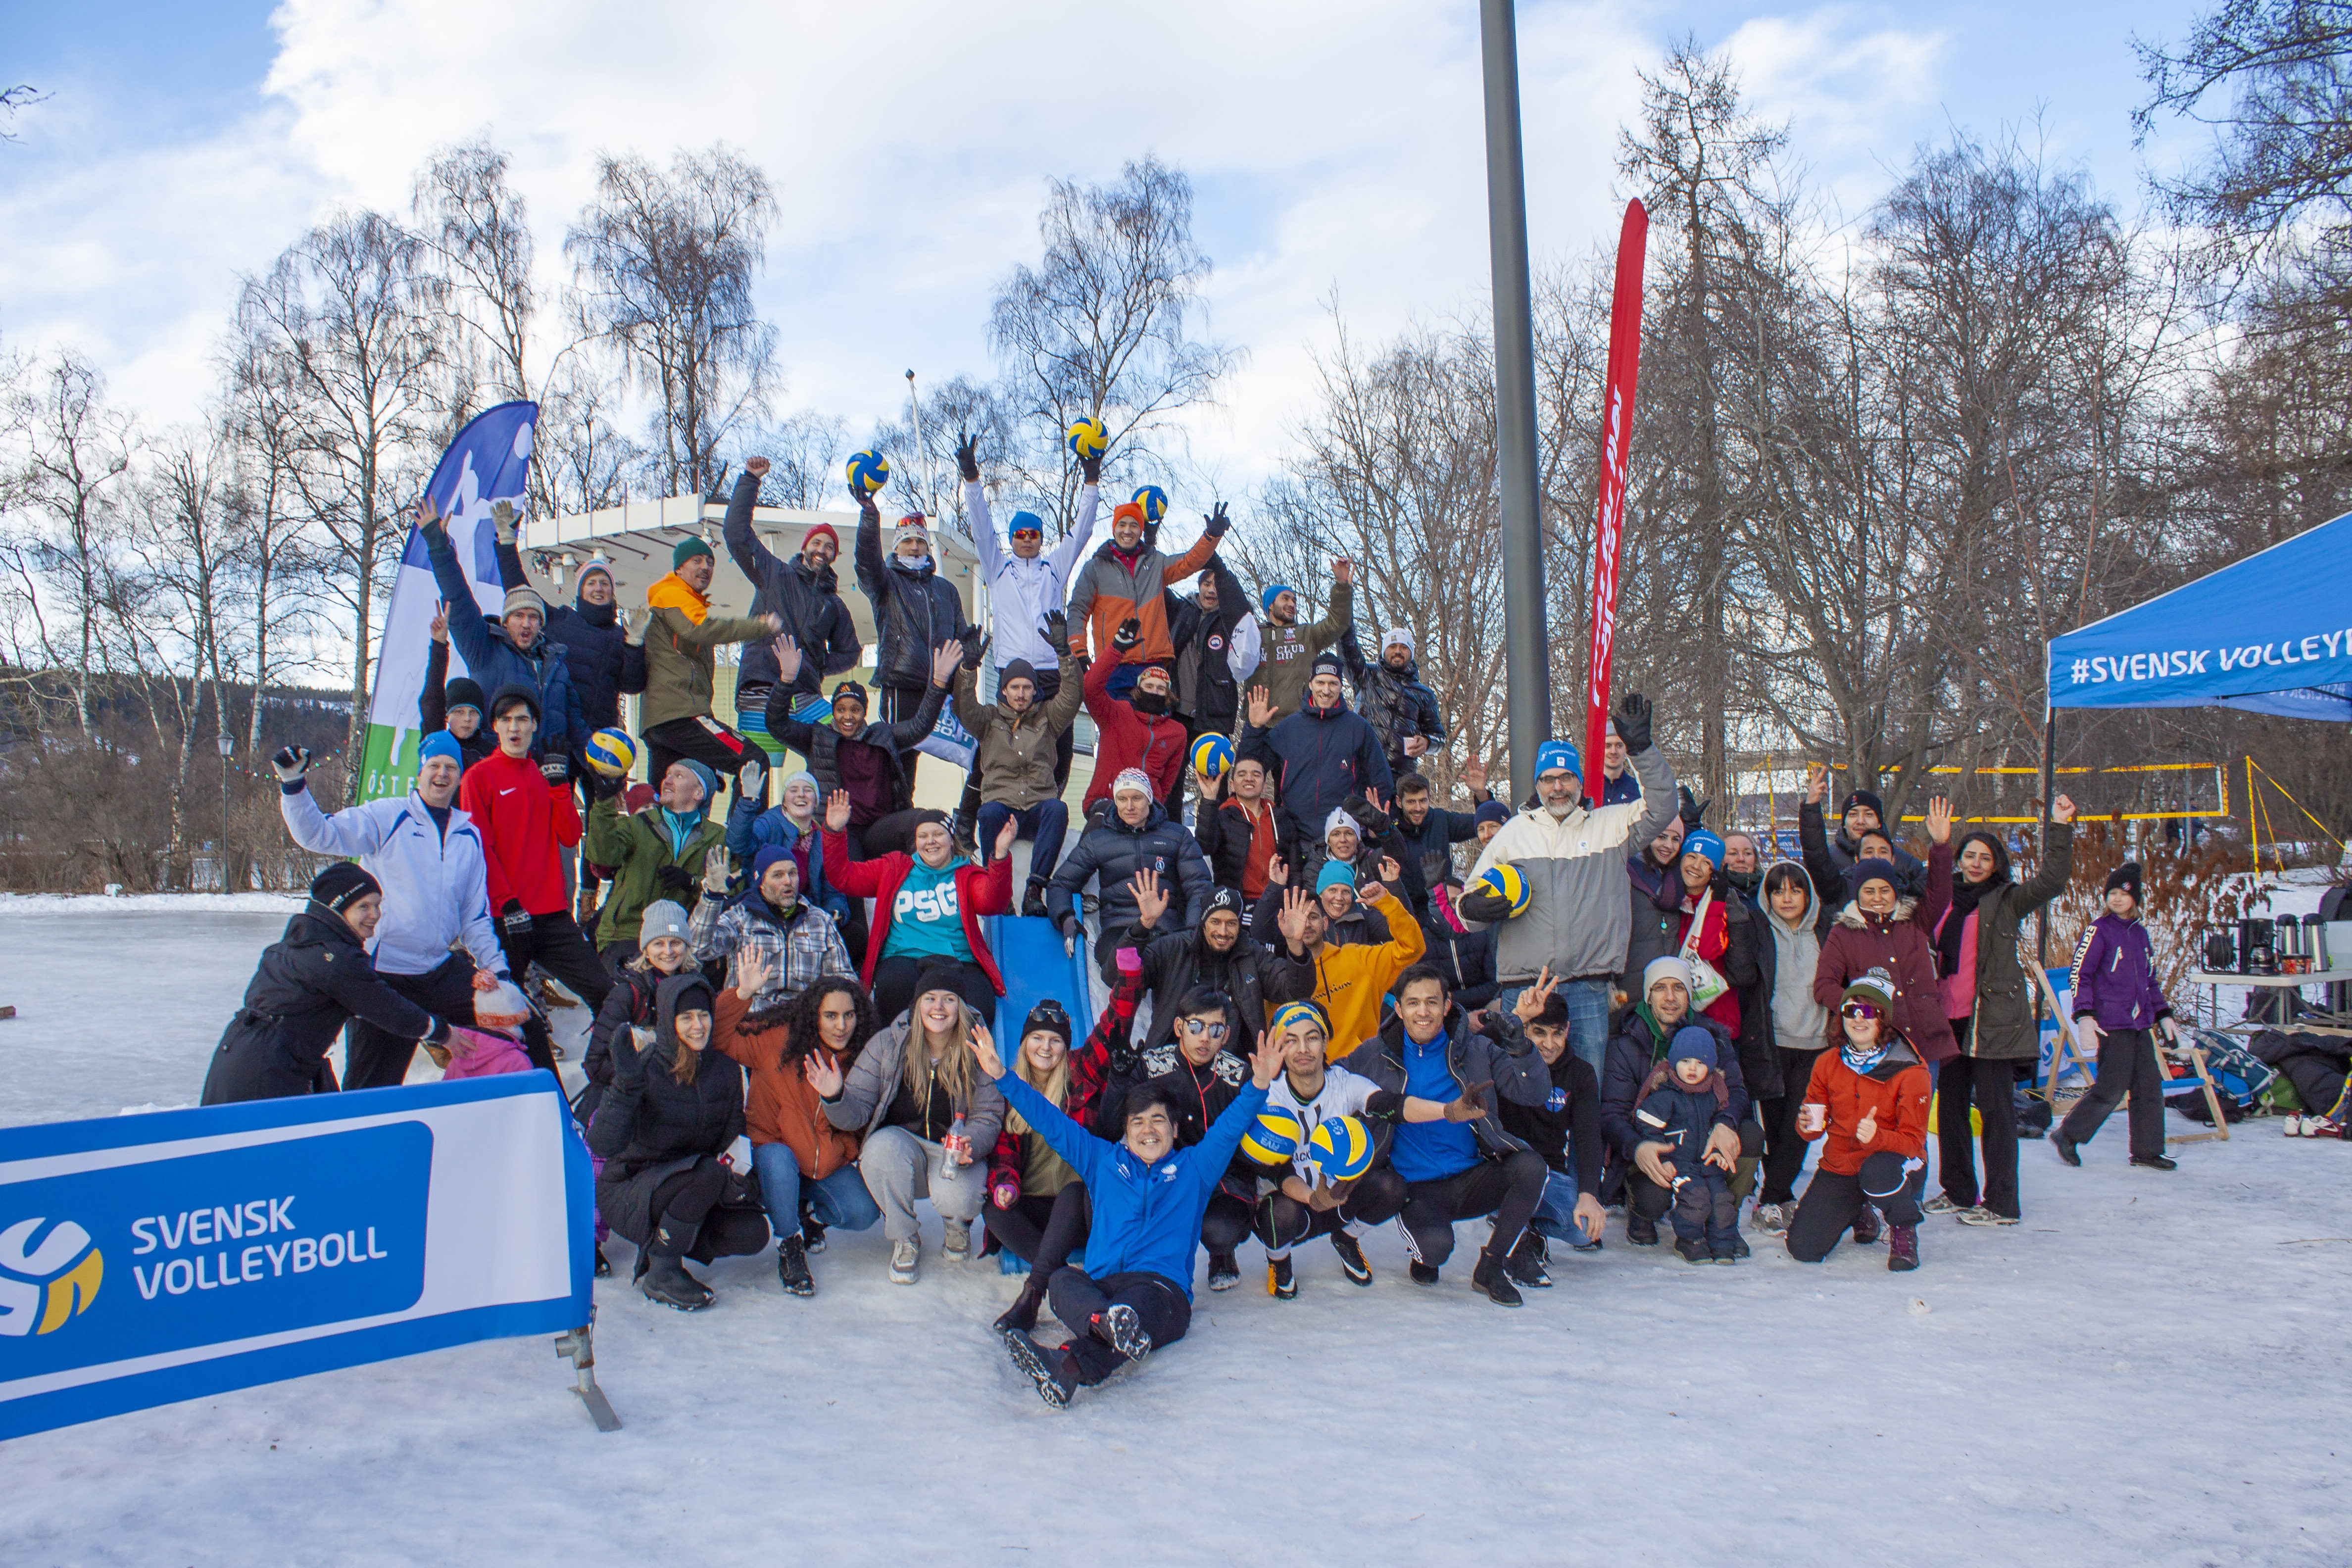 Snow Volleyball Festival attracts 100+ participants in Östersund, Sweden |  CEV